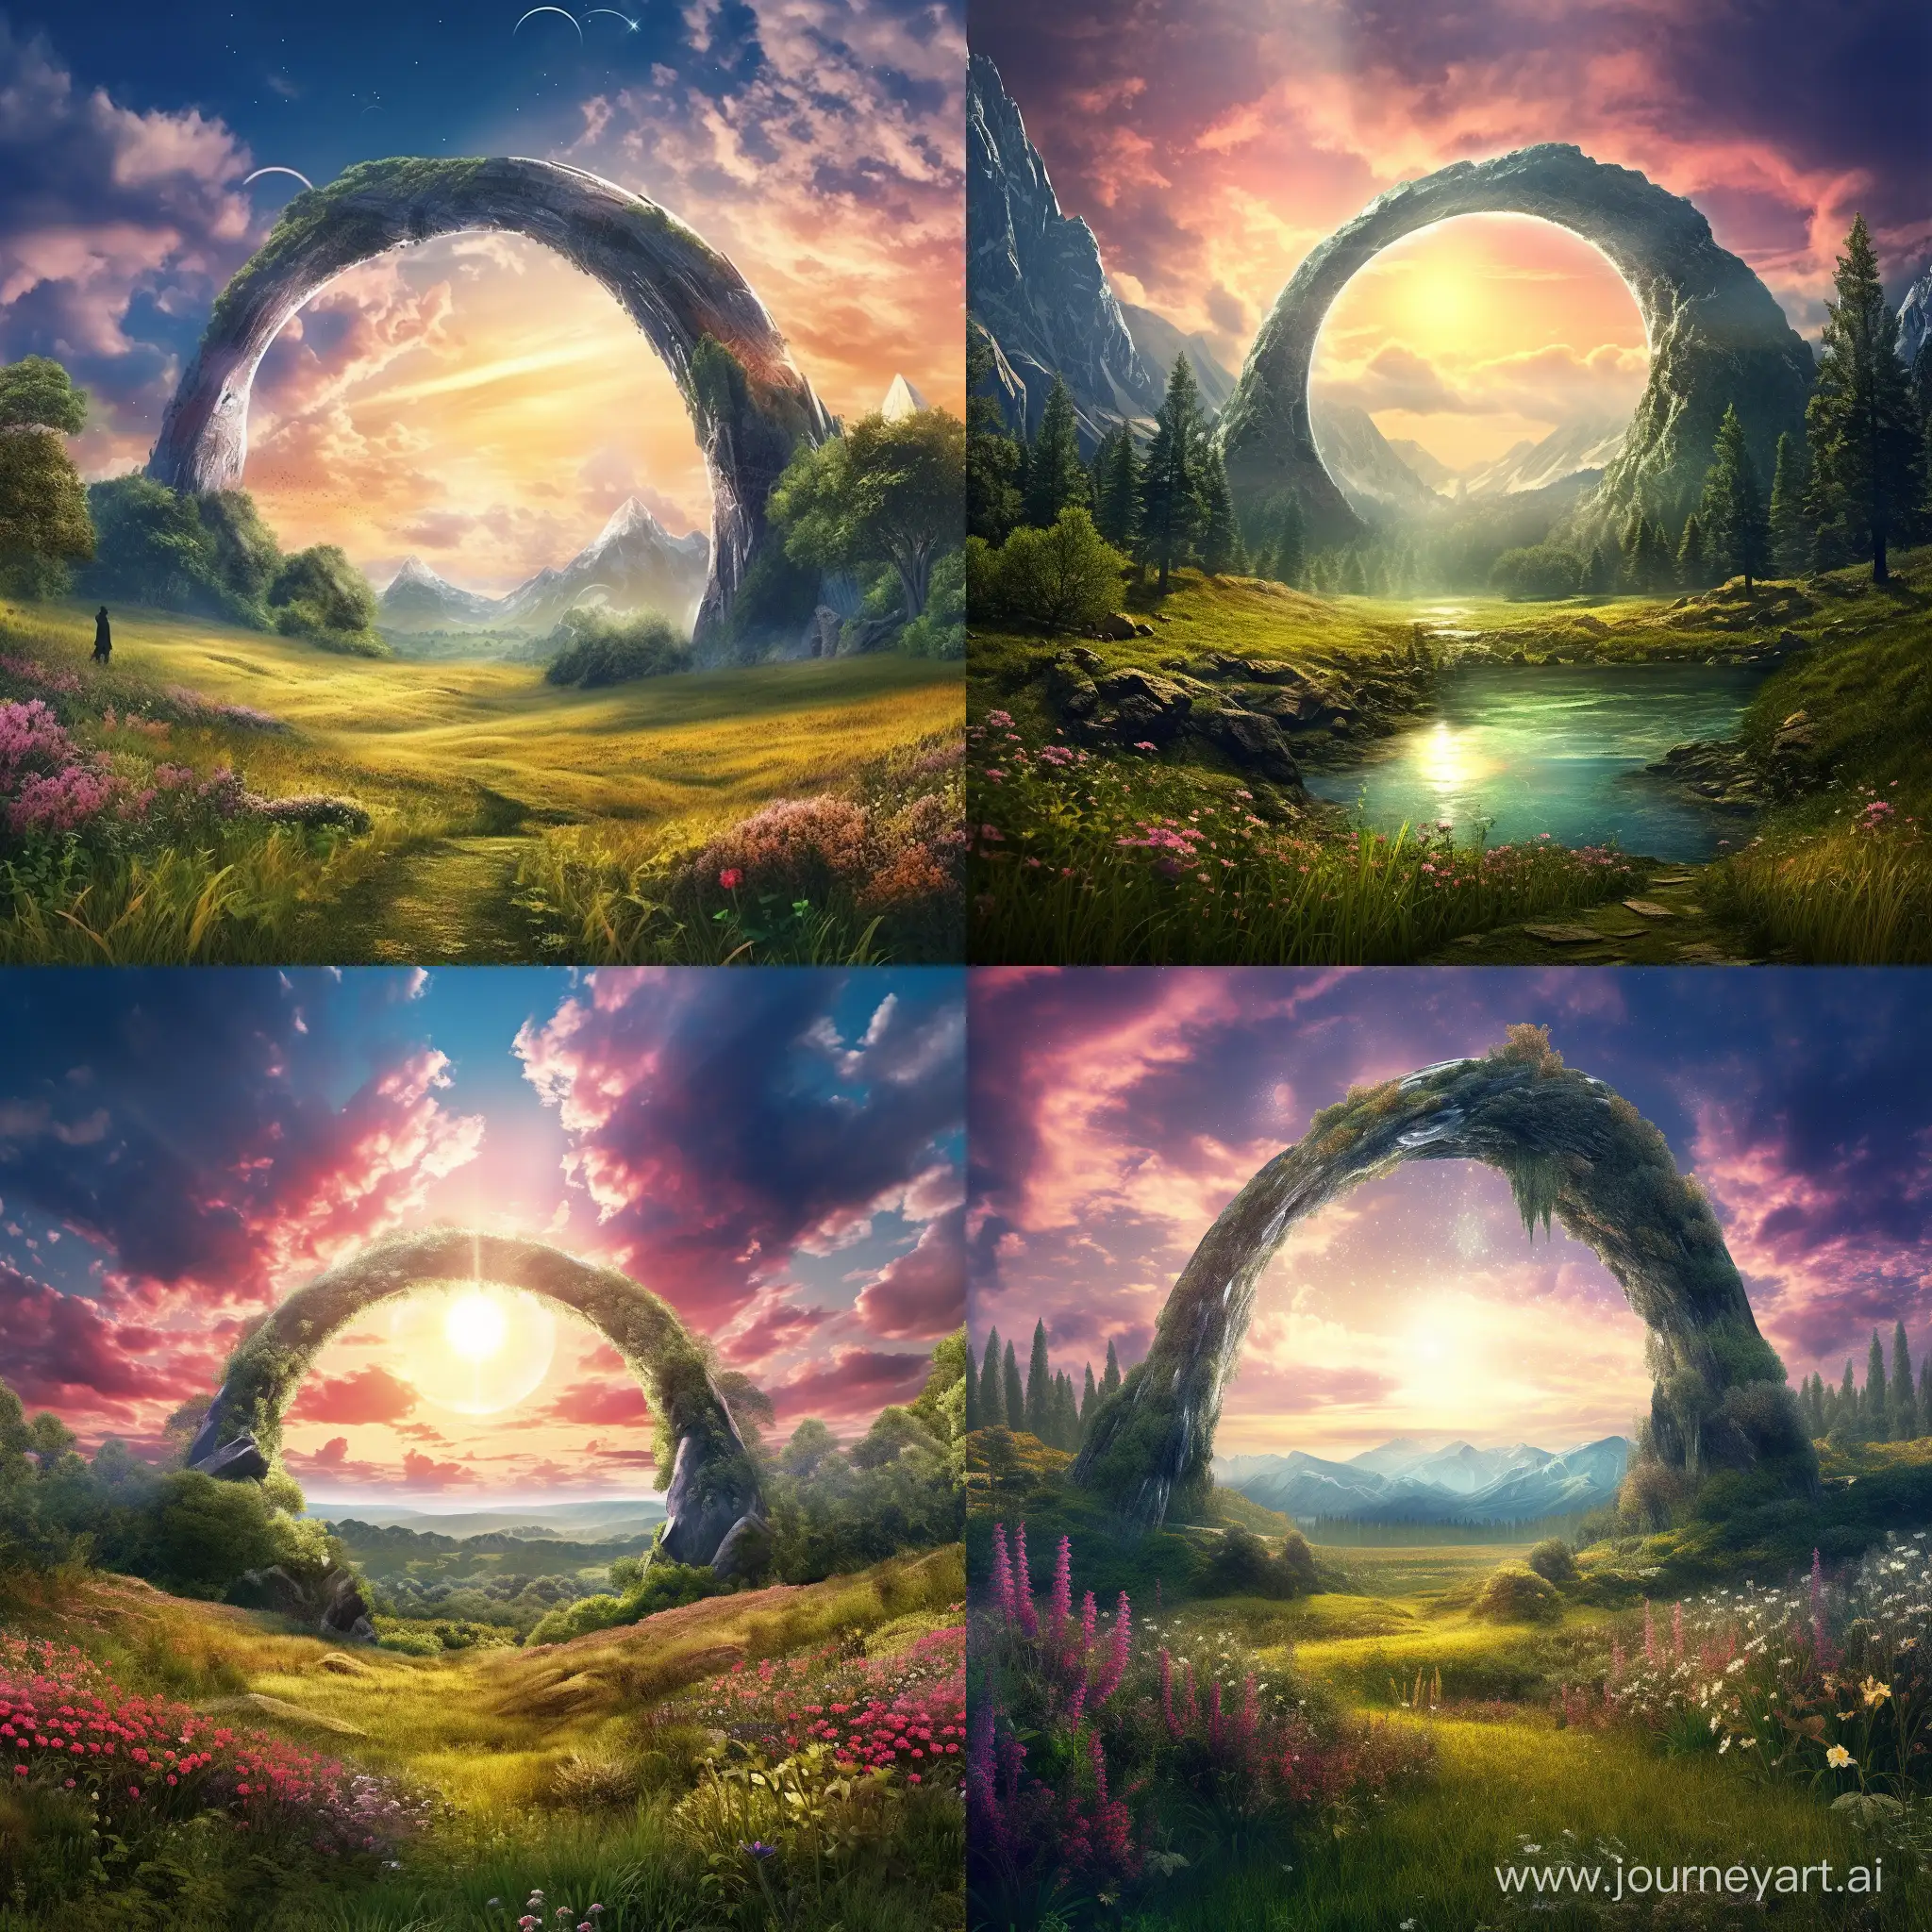 lush meadow with large alien arch in background, vibrant colorful clouds, bright sunlight reflections and highlights, style: digital painting with detailed textures and lighting effects to create a sense of depth and realism